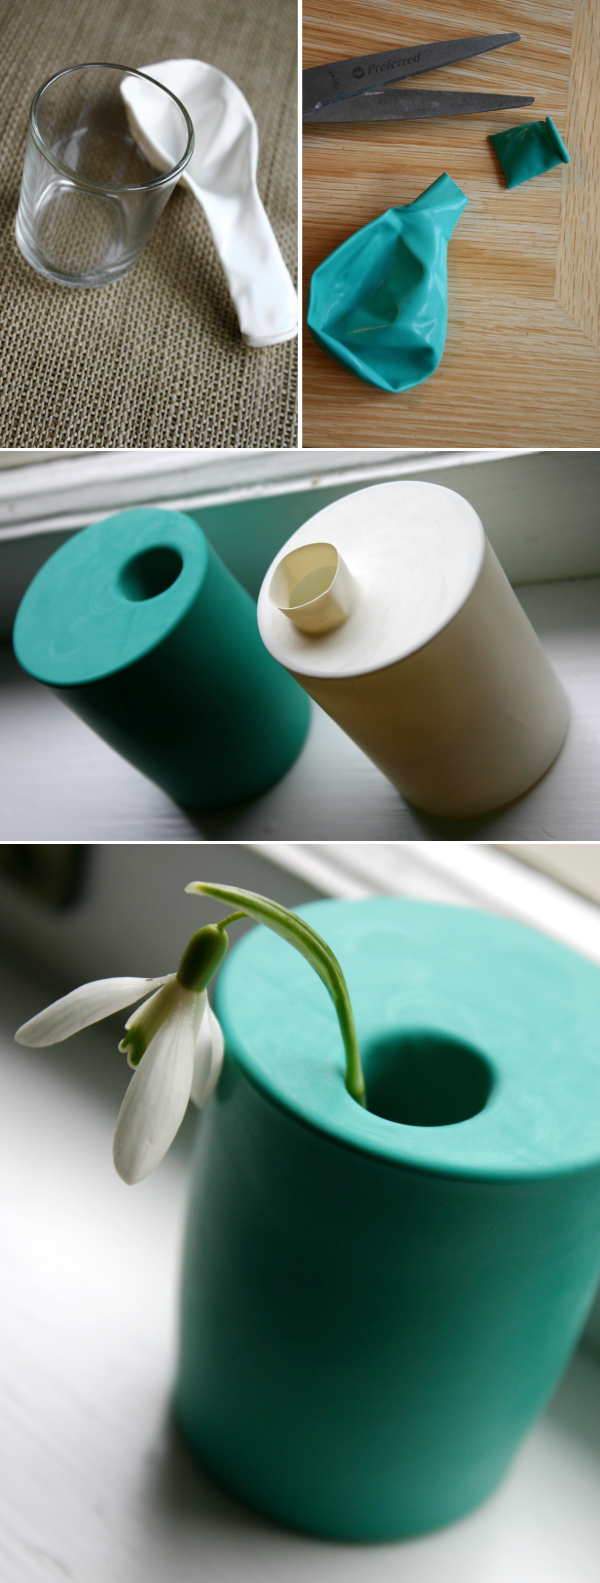 Turn a glass into a mini vase with a balloon.